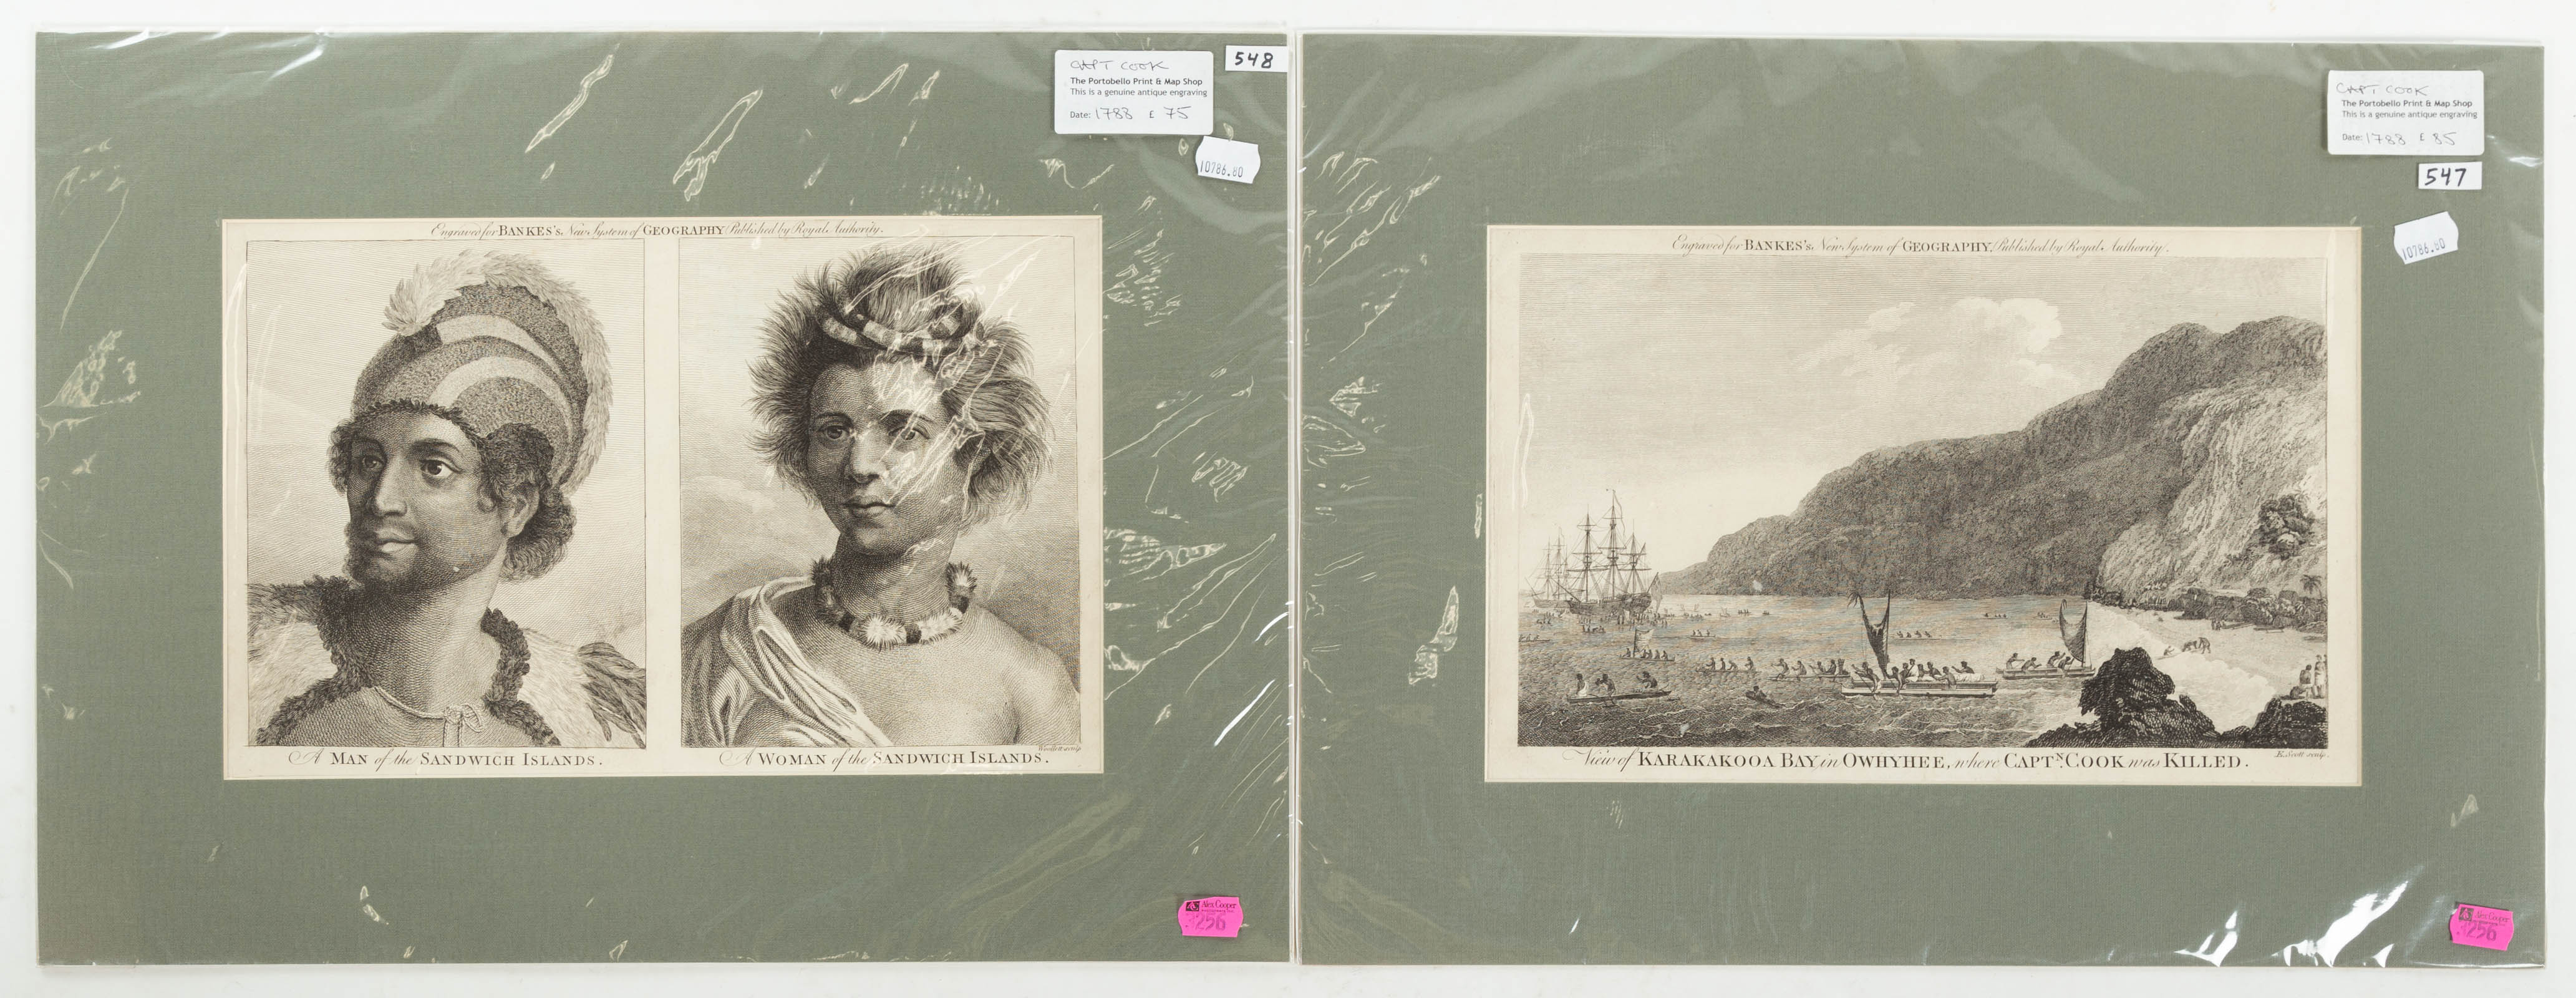 TWO CAPTAIN COOK ENGRAVINGS From 2e95c9